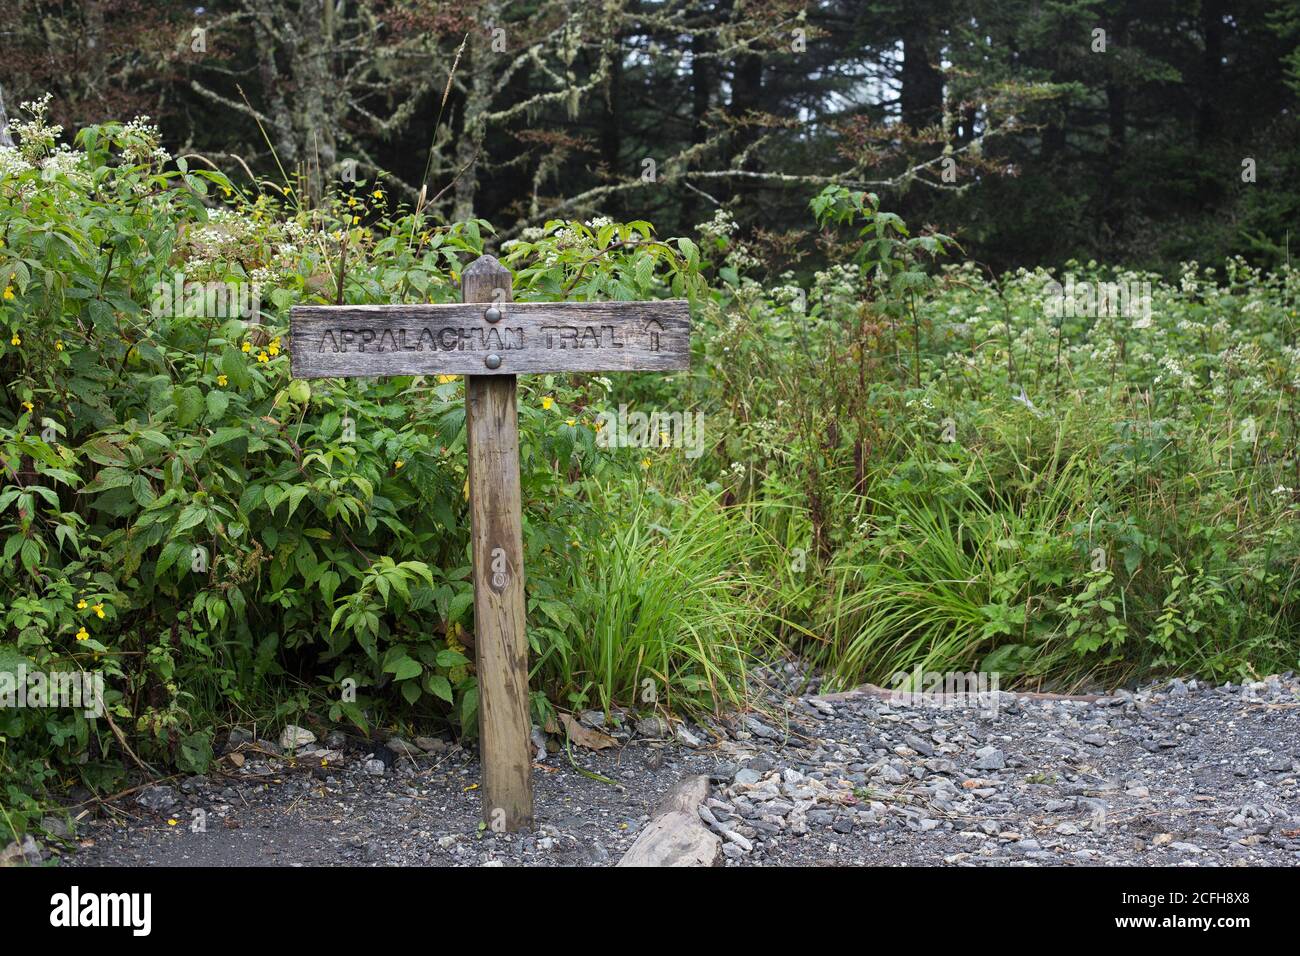 A sign for the Appalachian Trail, at Great Smoky Mountains National Park in the United States. Stock Photo